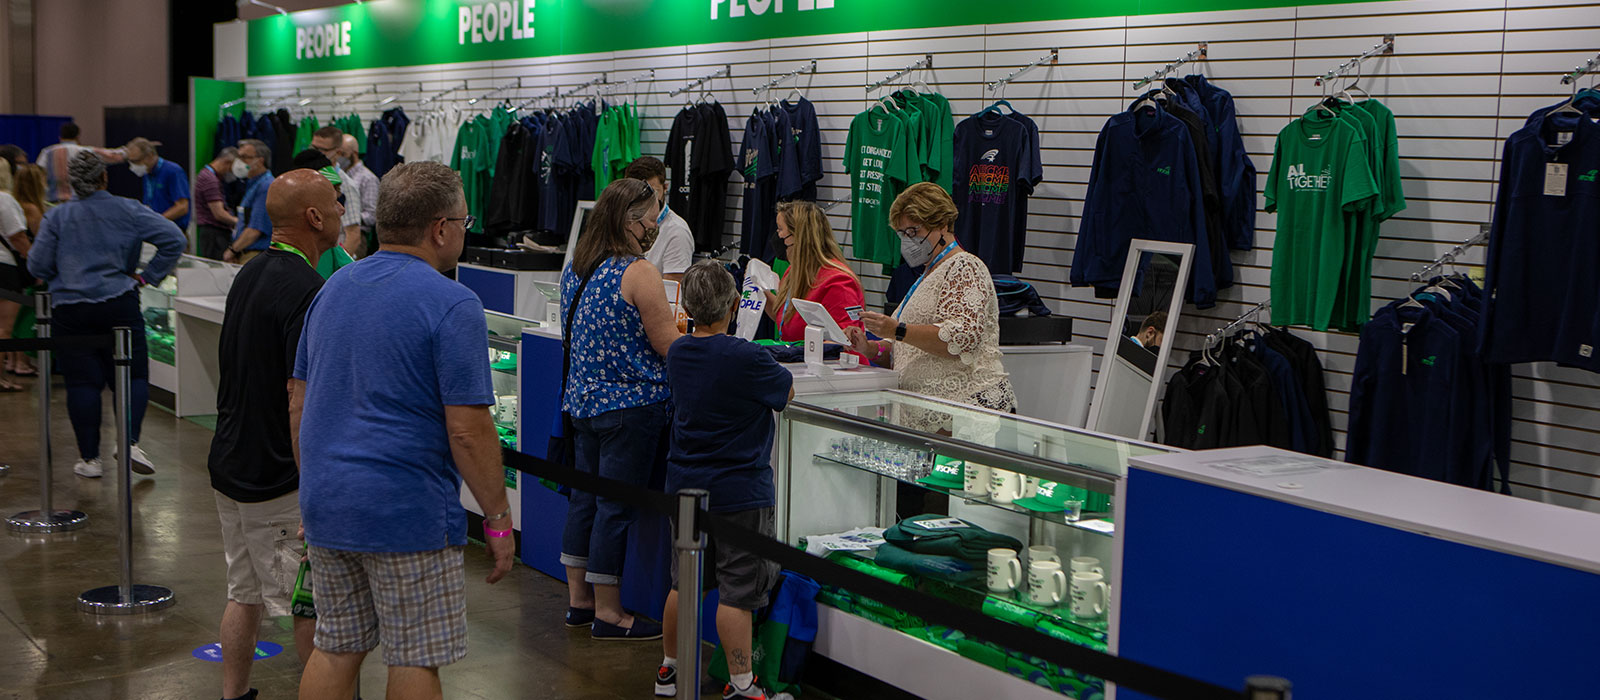 AFSCME “PEOPLE” booth purchases help us build worker power 